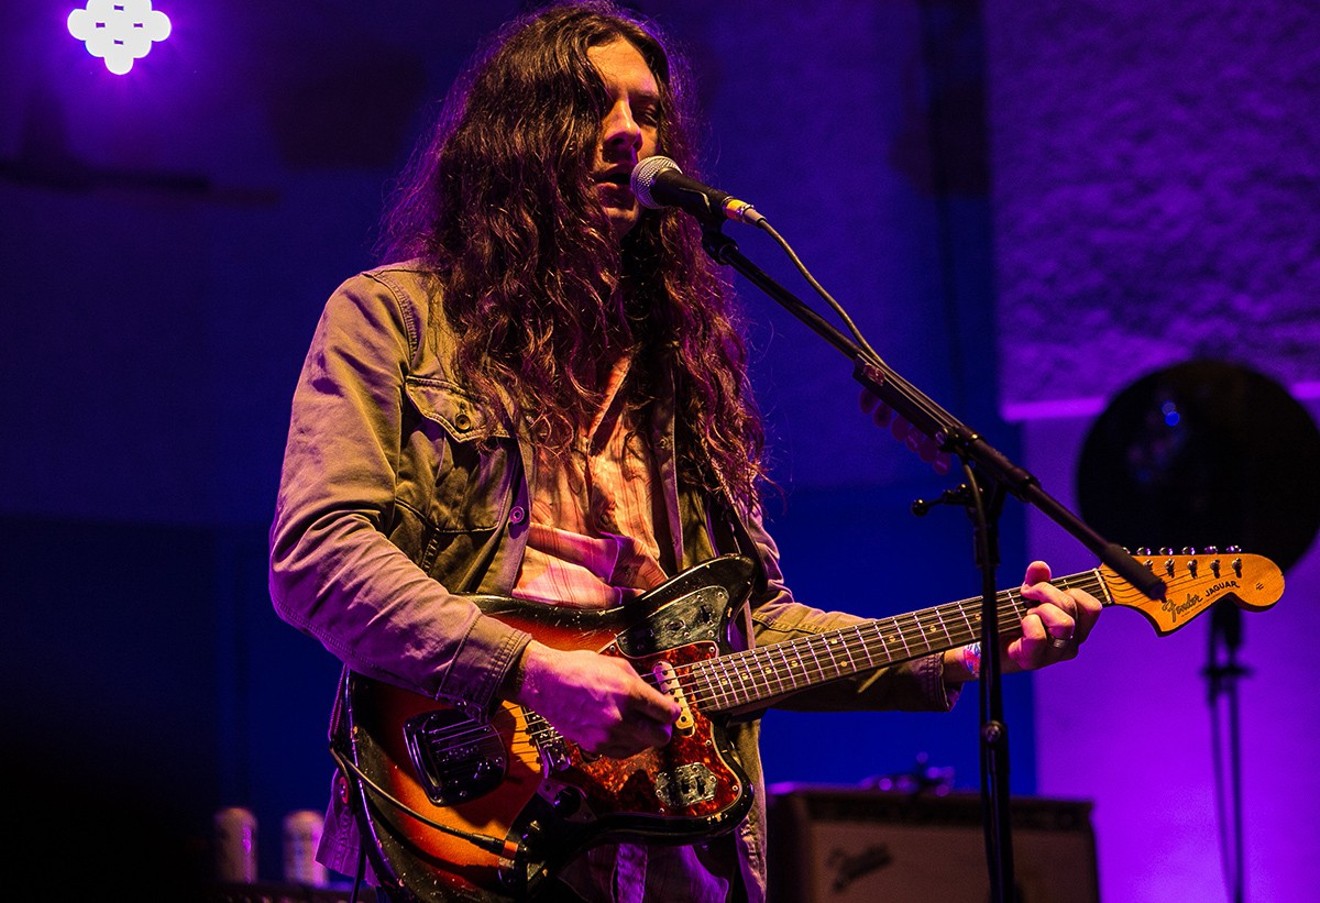 Kurt Vile is the living vision of all your '90s grunge gods. View more photos from Kurt Vile & the Violators at the North Beach Bandshell here.